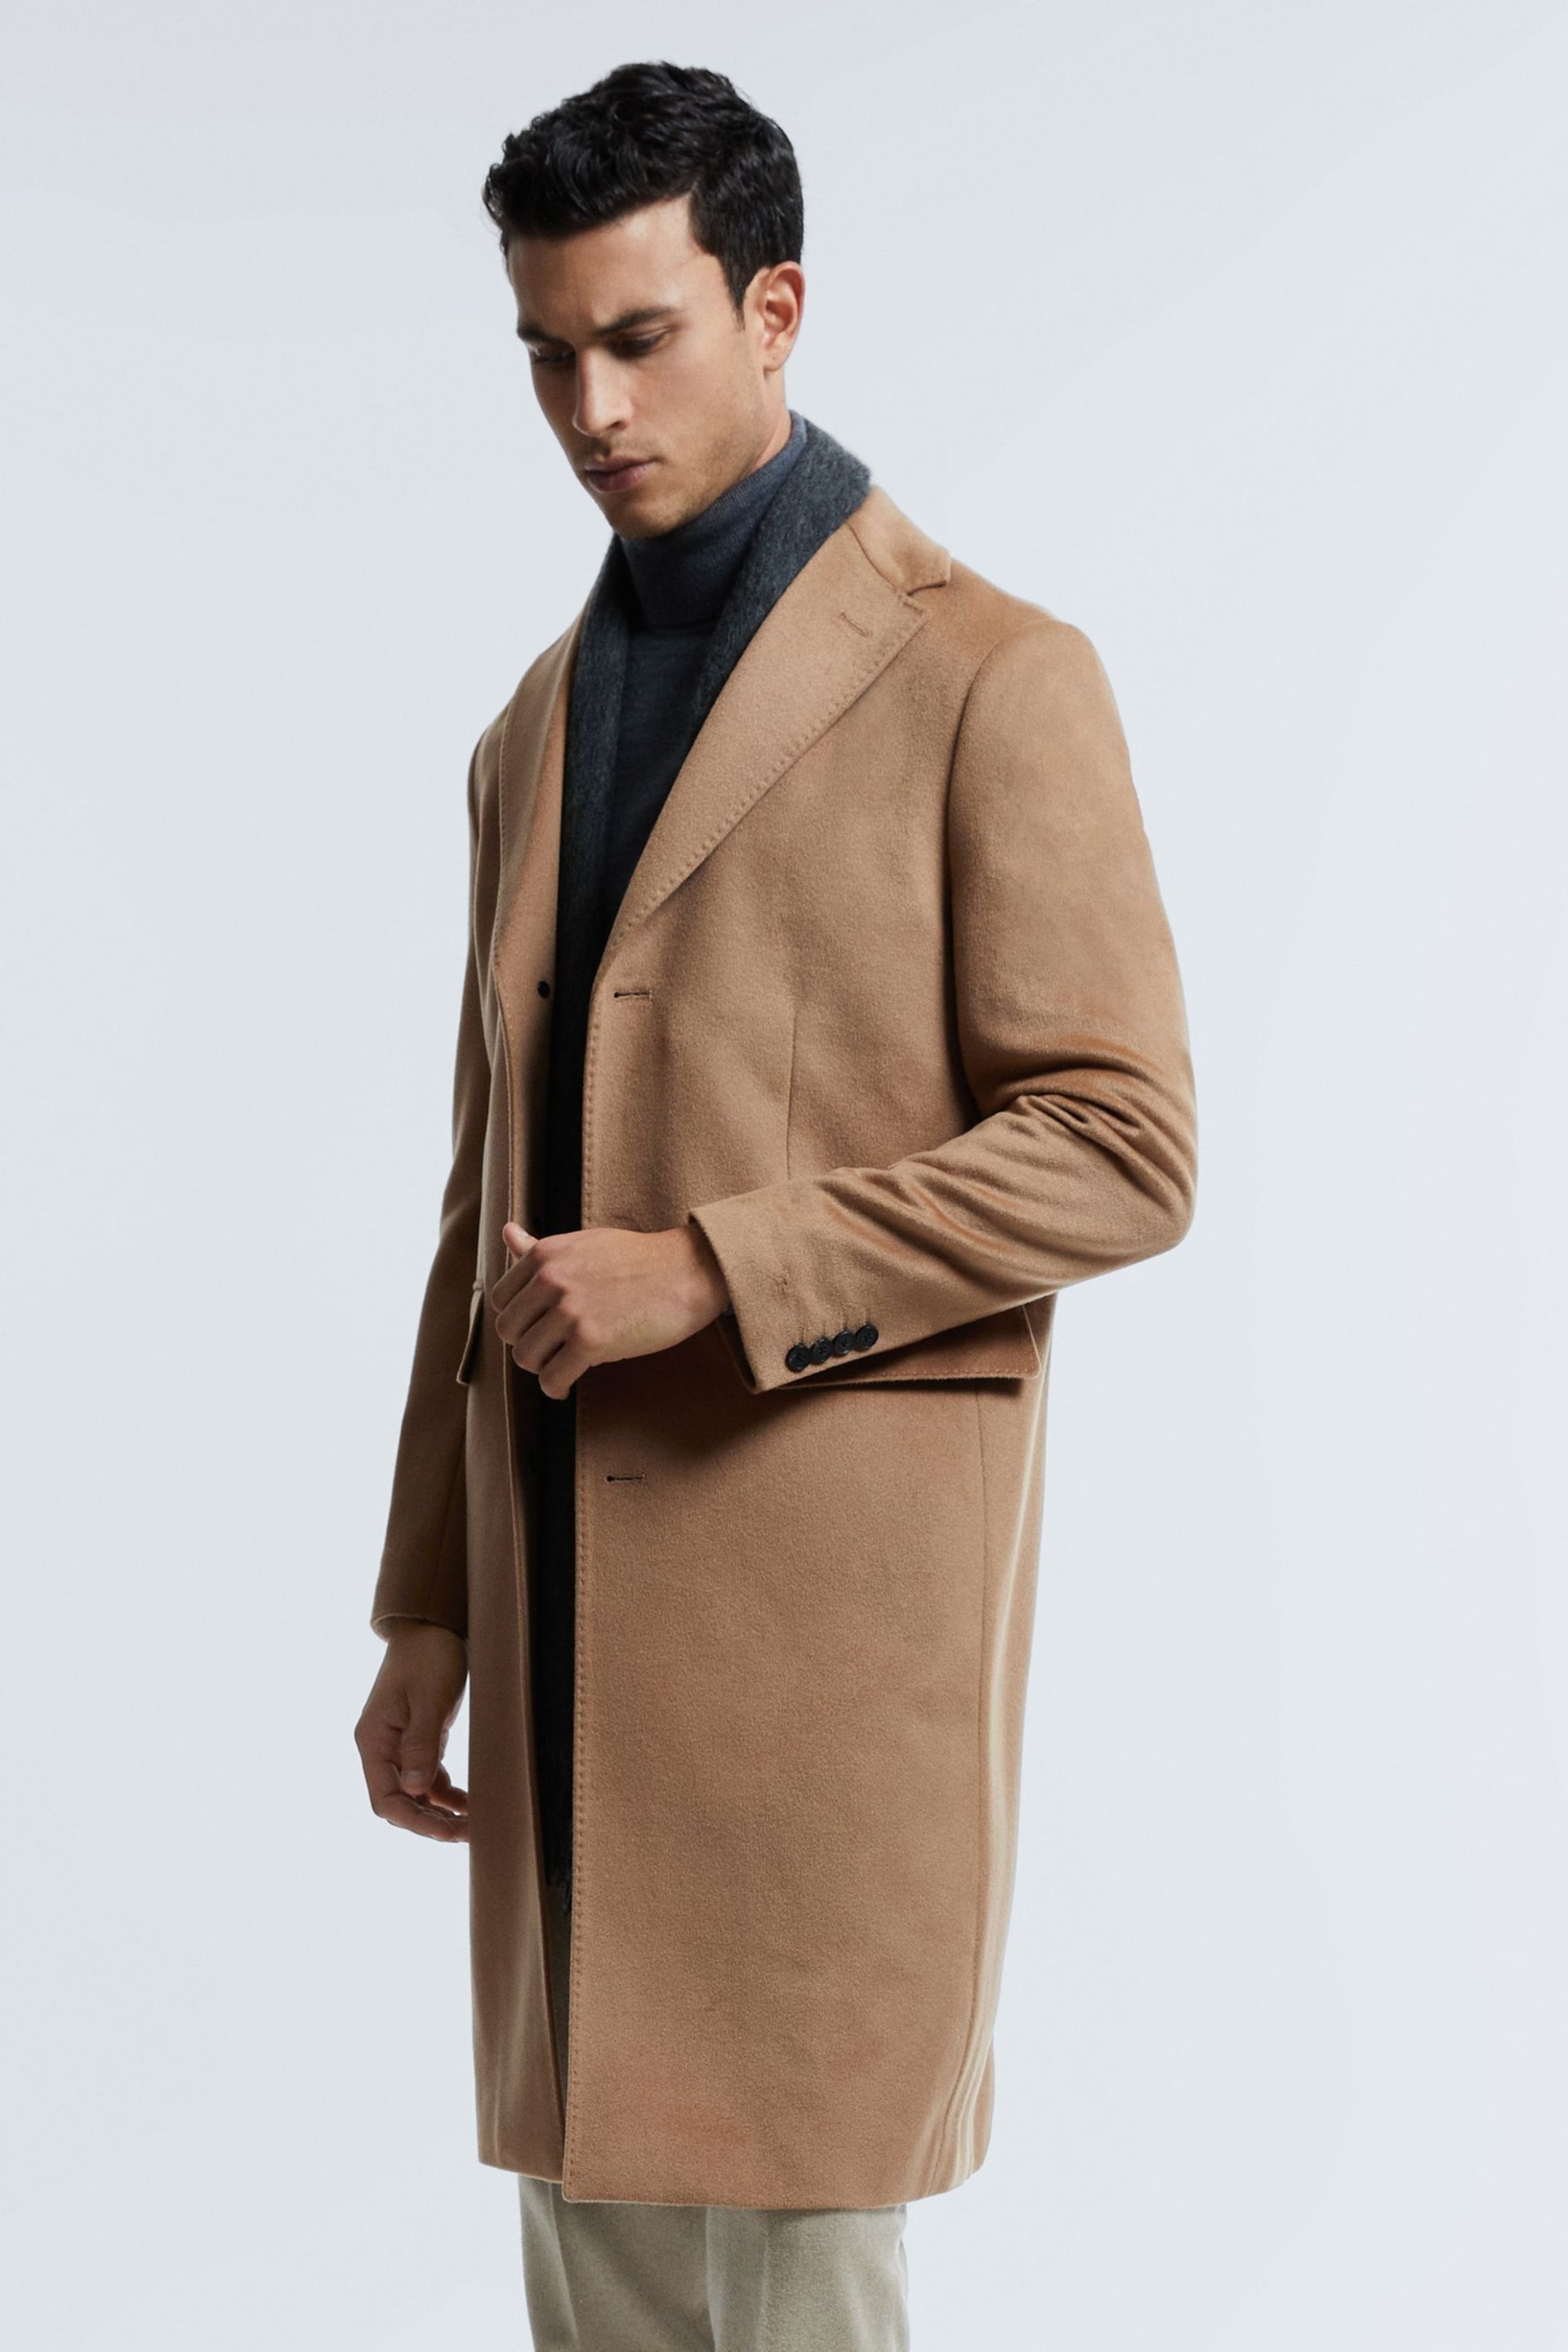 Reiss Camel Tycho Atelier Cashmere Single Breasted Coat - Image 3 of 7